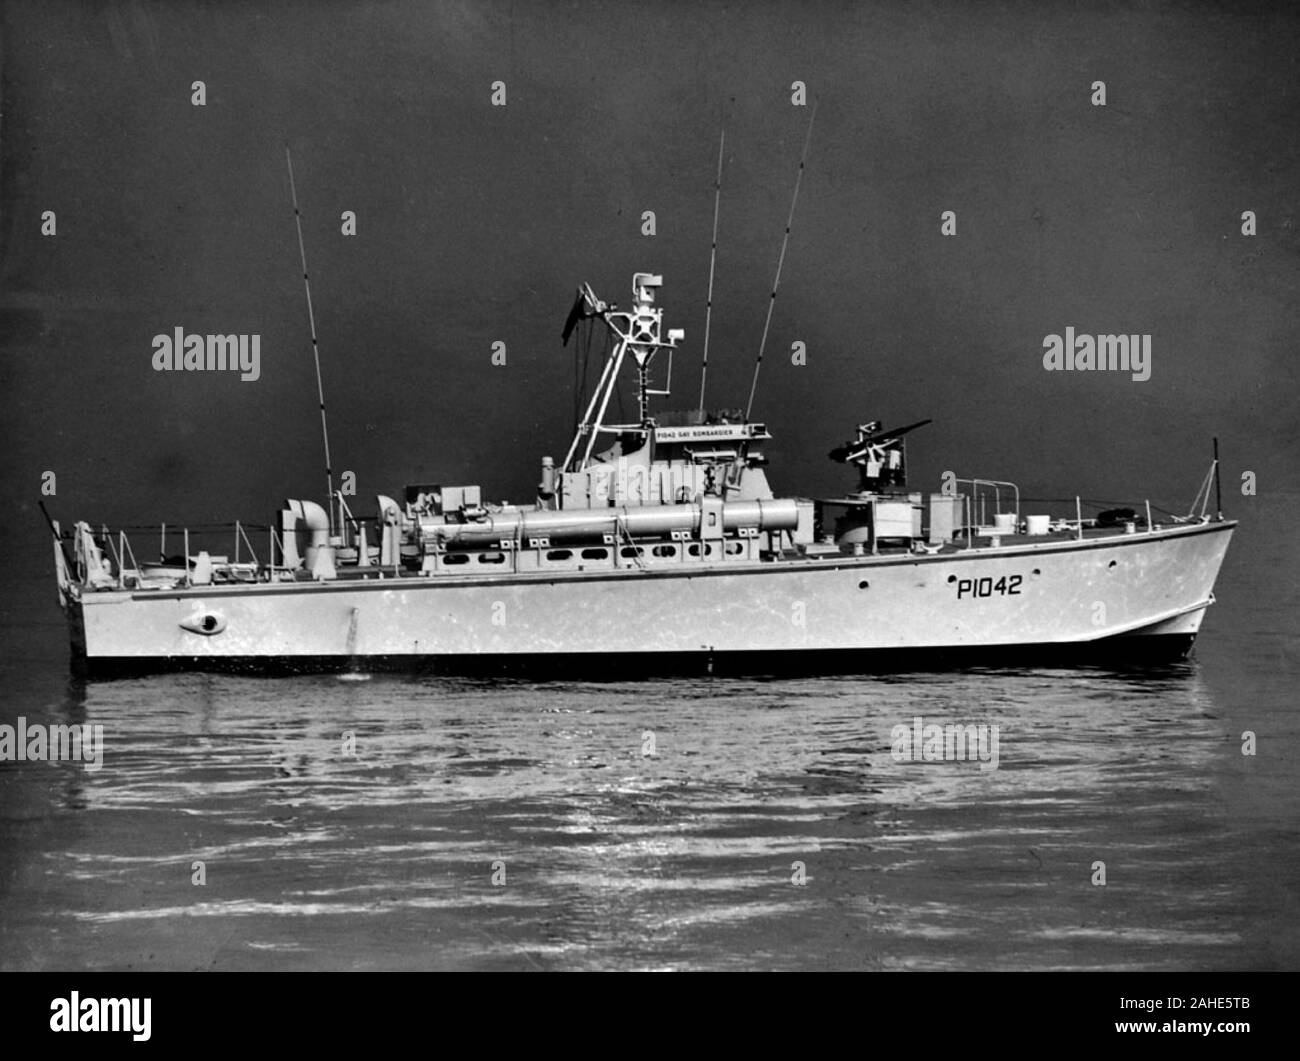 AJAXNETPHOTO. 1952. PORTSMOUTH, ENGLAND. - FAST PATROL BOATS Type 'B' - VOSPER LTD., PORTSMOUTH BUILT GAY BOMBARDIER PENDANT NR. P1042. TRIALS AND MARKETING PHOTOS FROM VOSPER THORNYCROFT COLLECTION. BOAT LAUNCHED 20TH AUGUST, 1952. BROADSIDE VIEW OF STARBOARD SIDE, CRAFT AS M.T.B. PHOTO:VT COLLECTION/AJAXNETPHOTO    REF:GR3122605 13515 Stock Photo